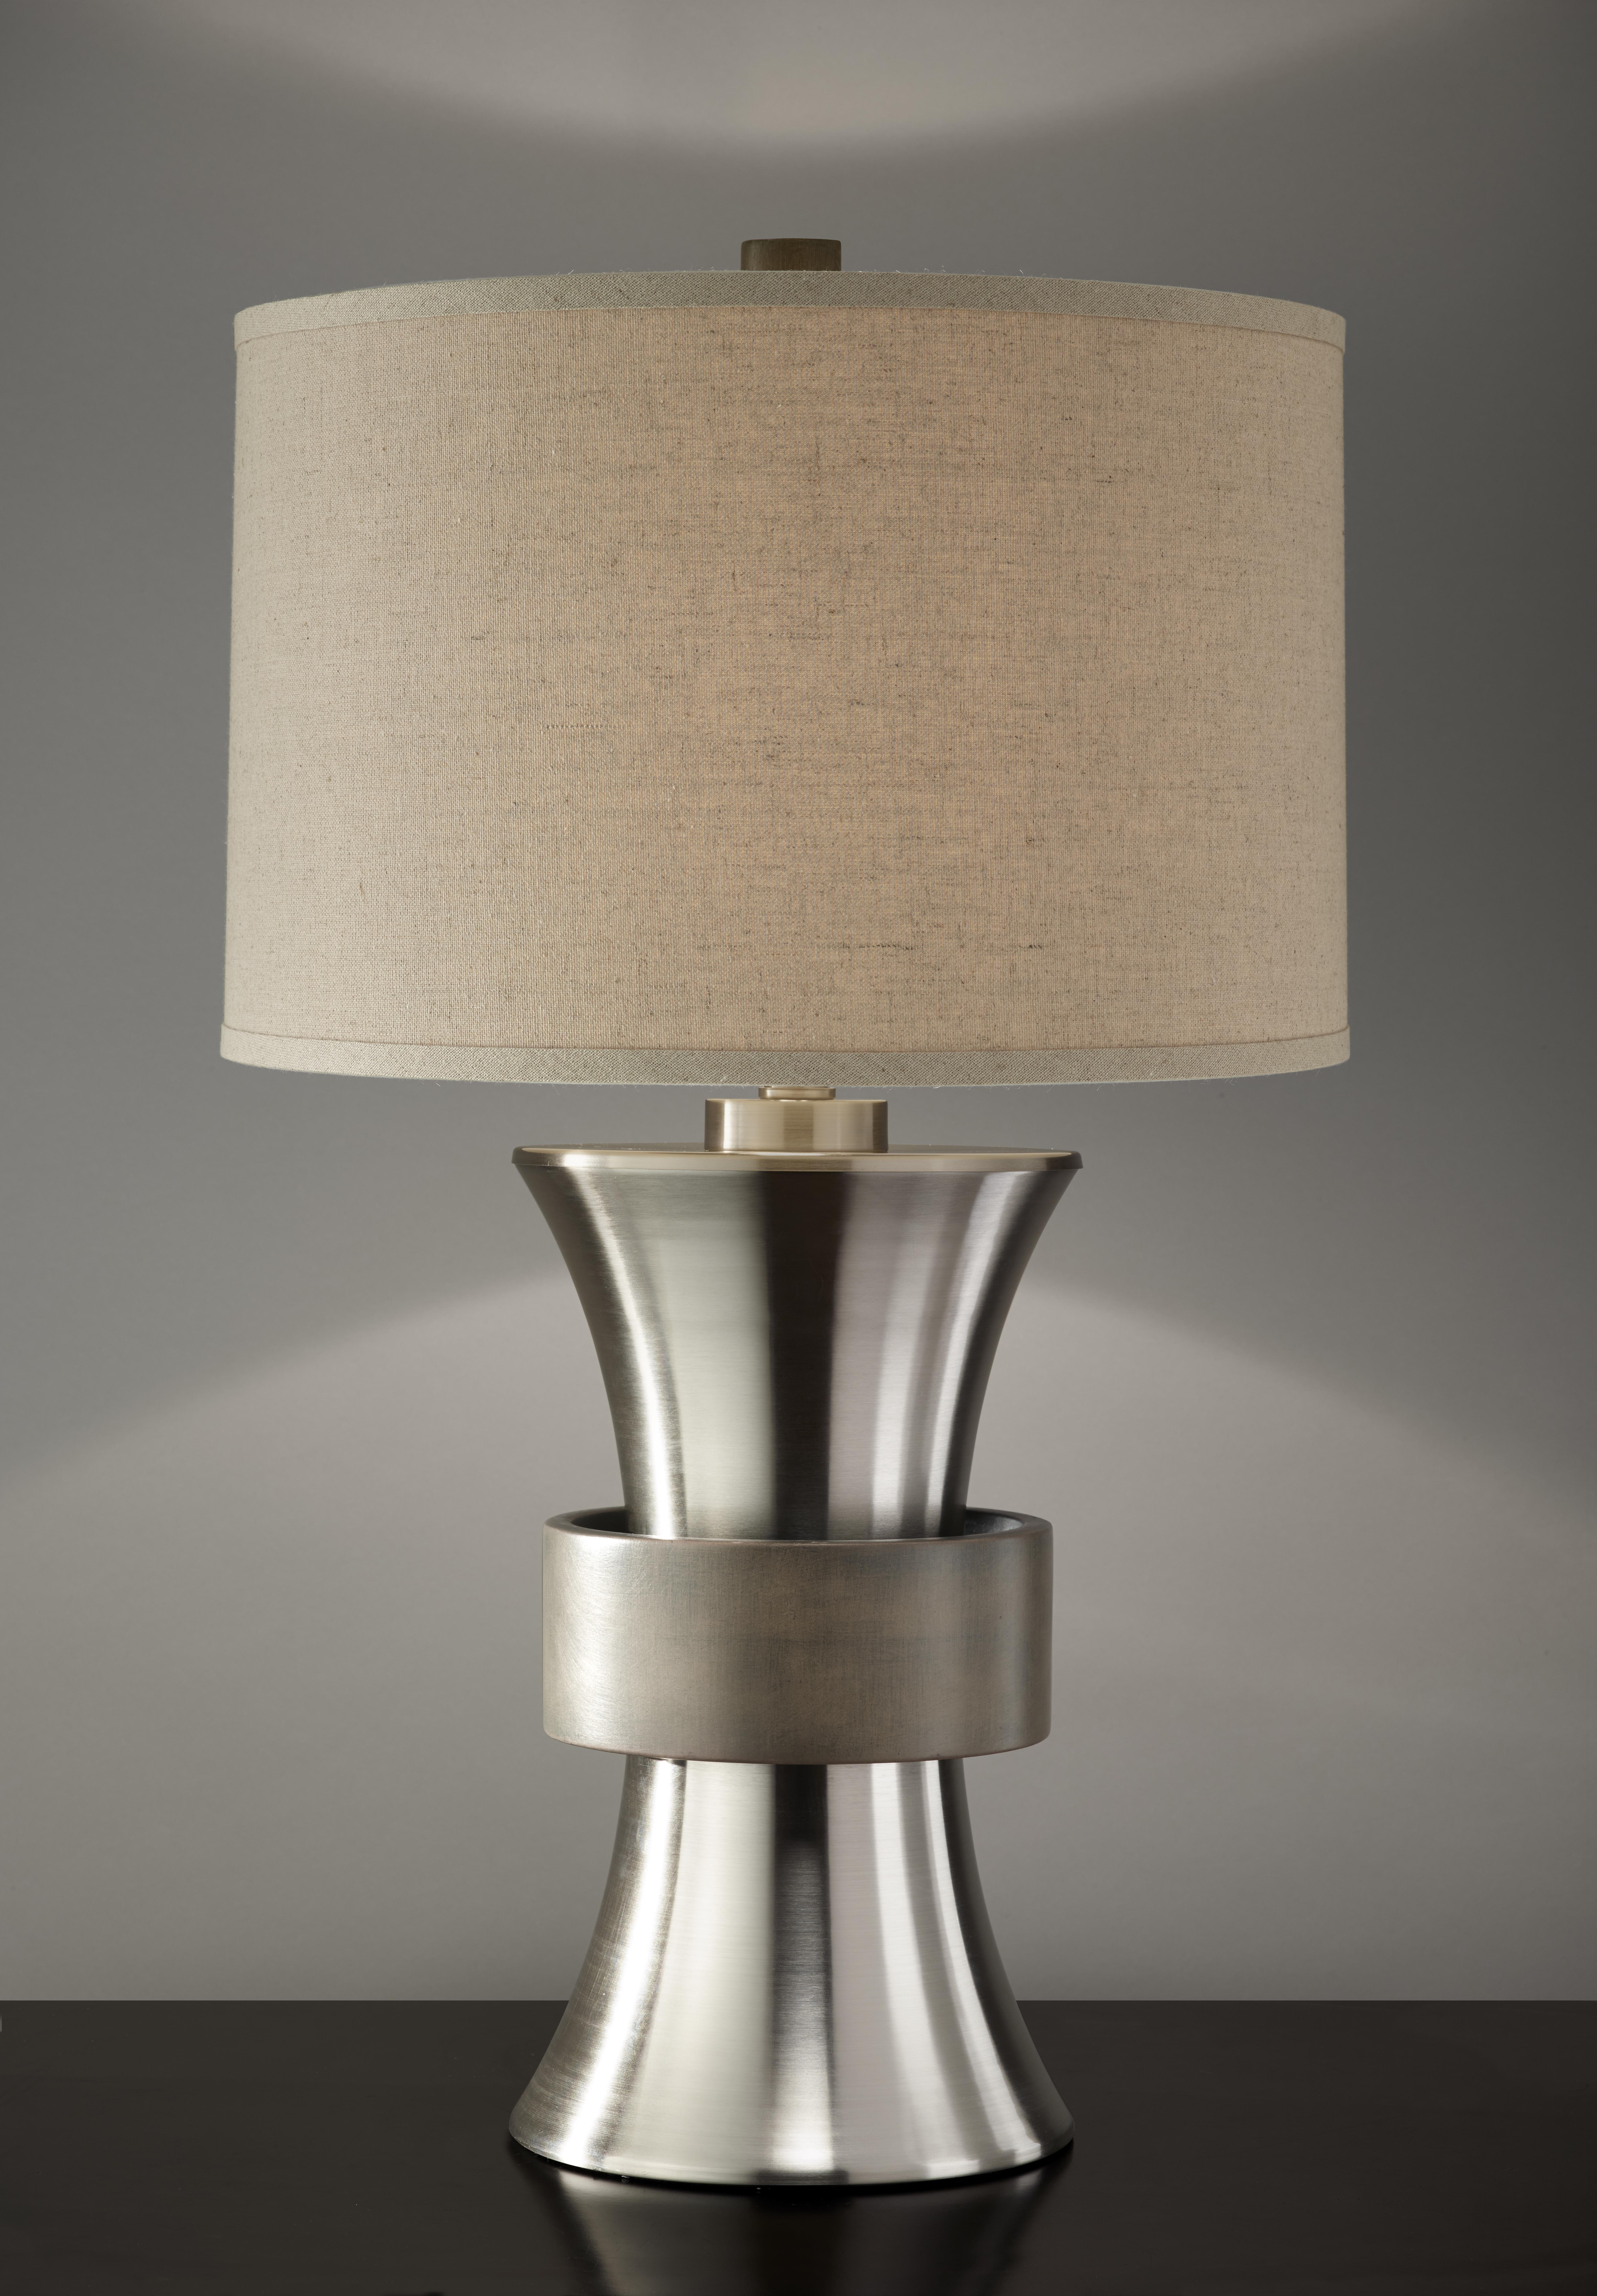 Feiss to Debut New Lamps and Mirrors at Spring High Point